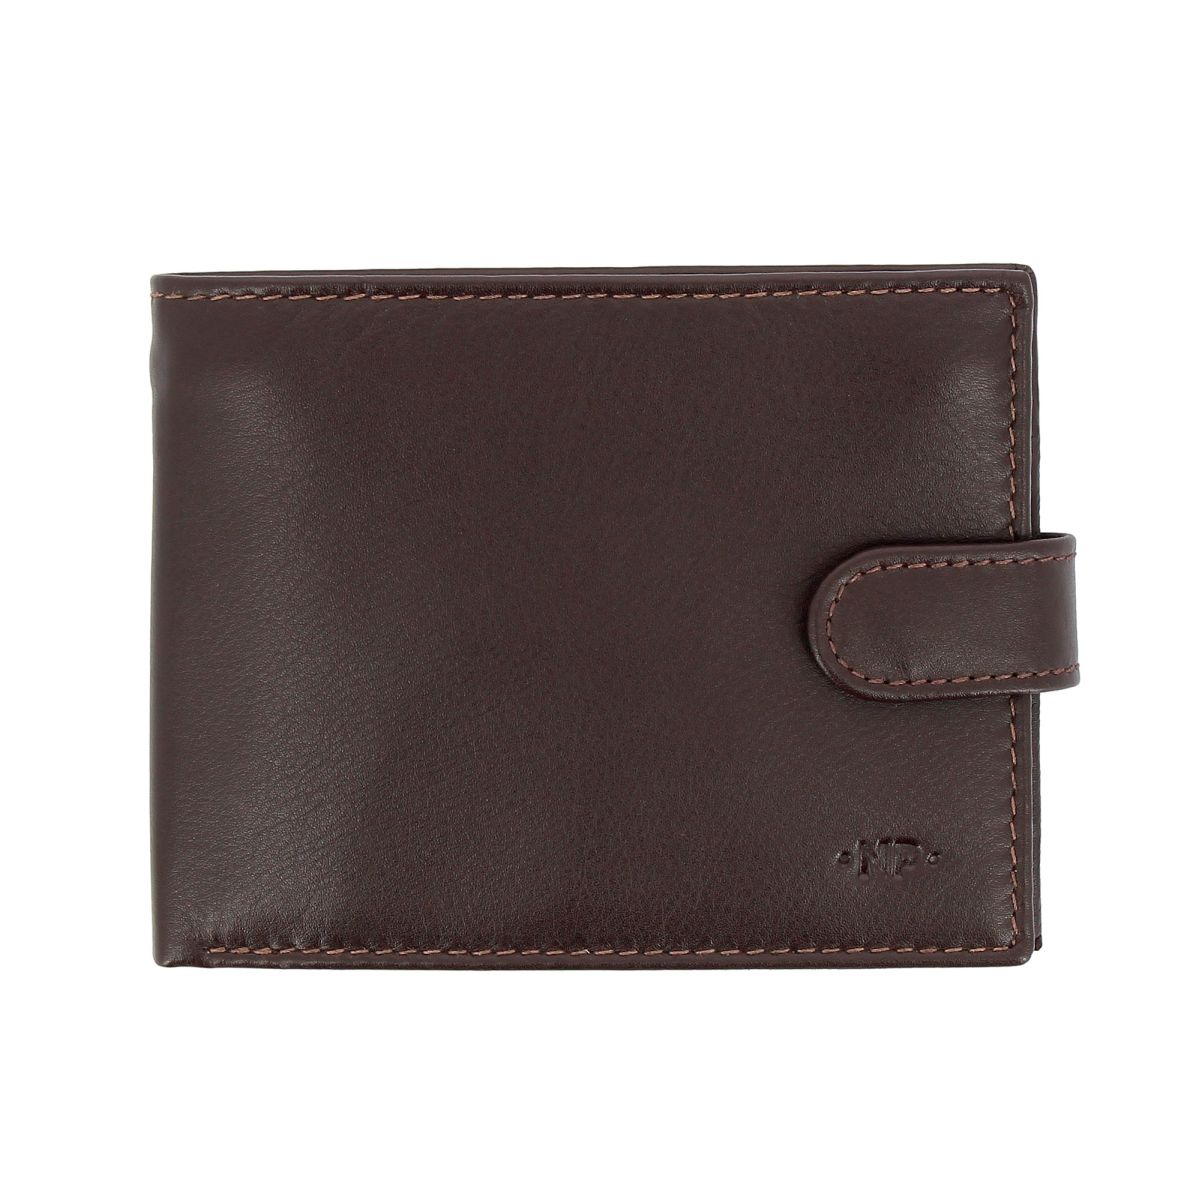 Mens Leather Wallet With Snap Button - Dark Brown